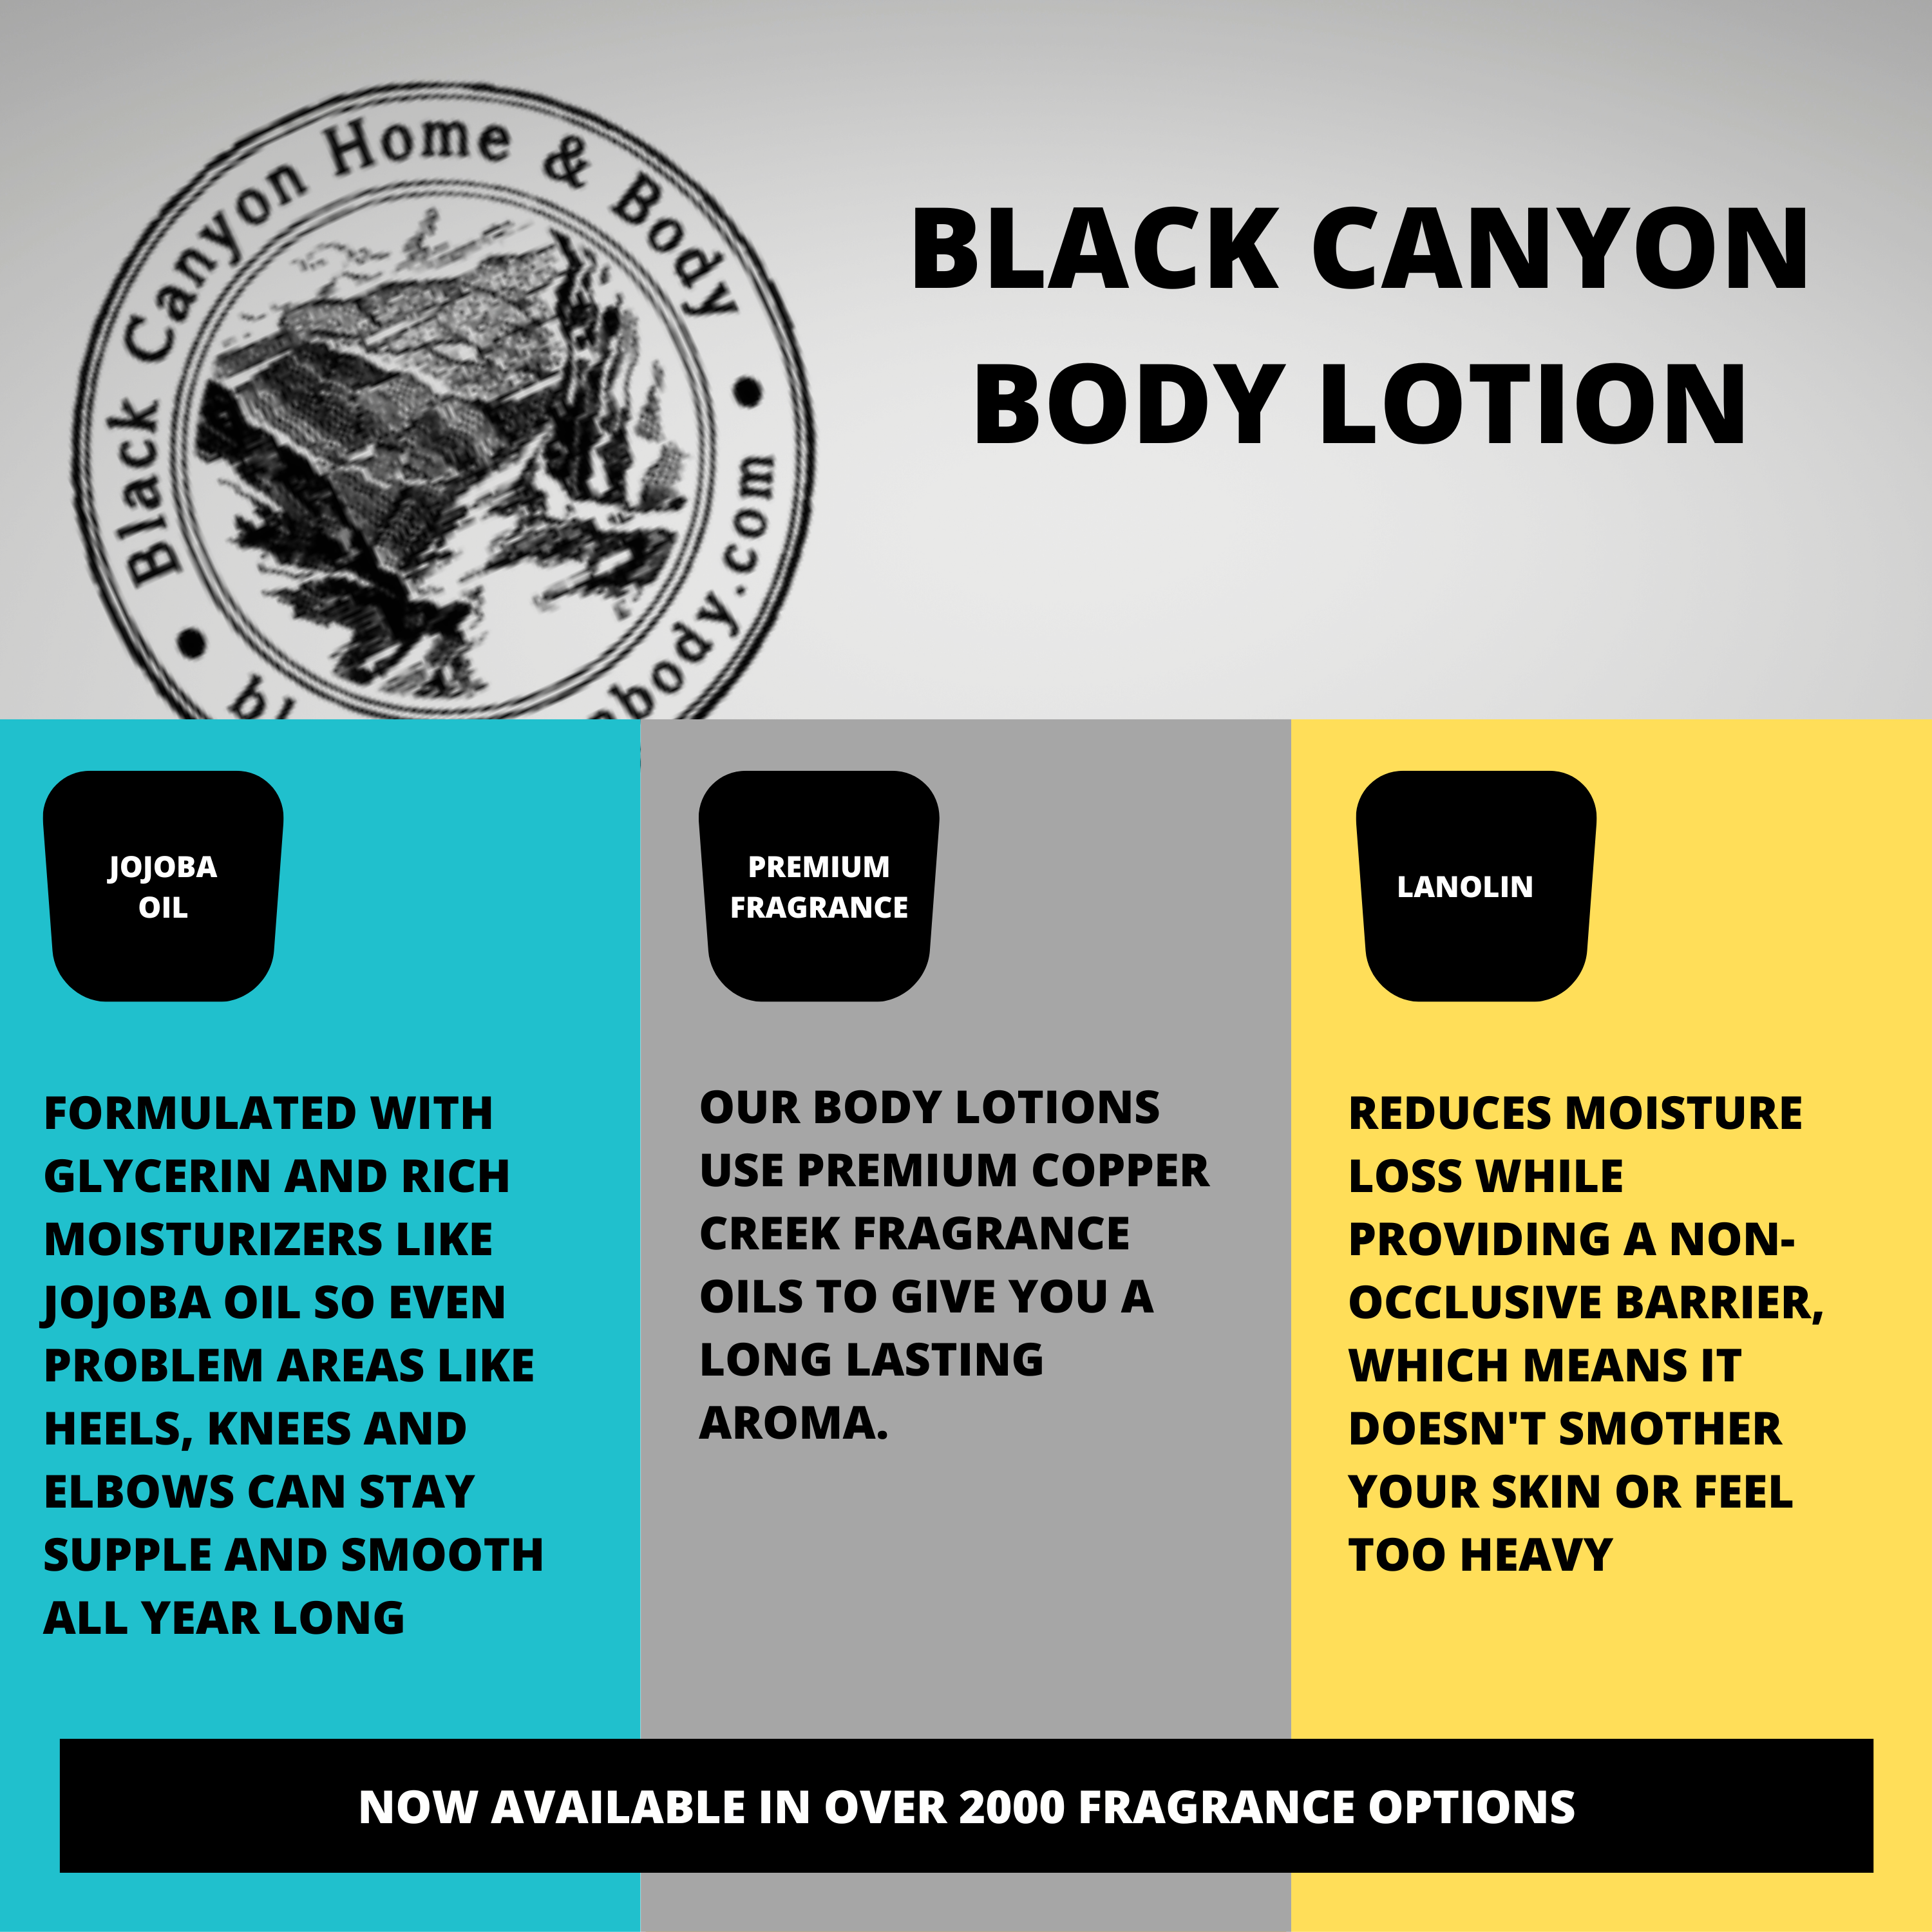 Black Canyon Peanut Butter Cups Scented Luxury Body Lotion with Lanolin and Jojoba Oil